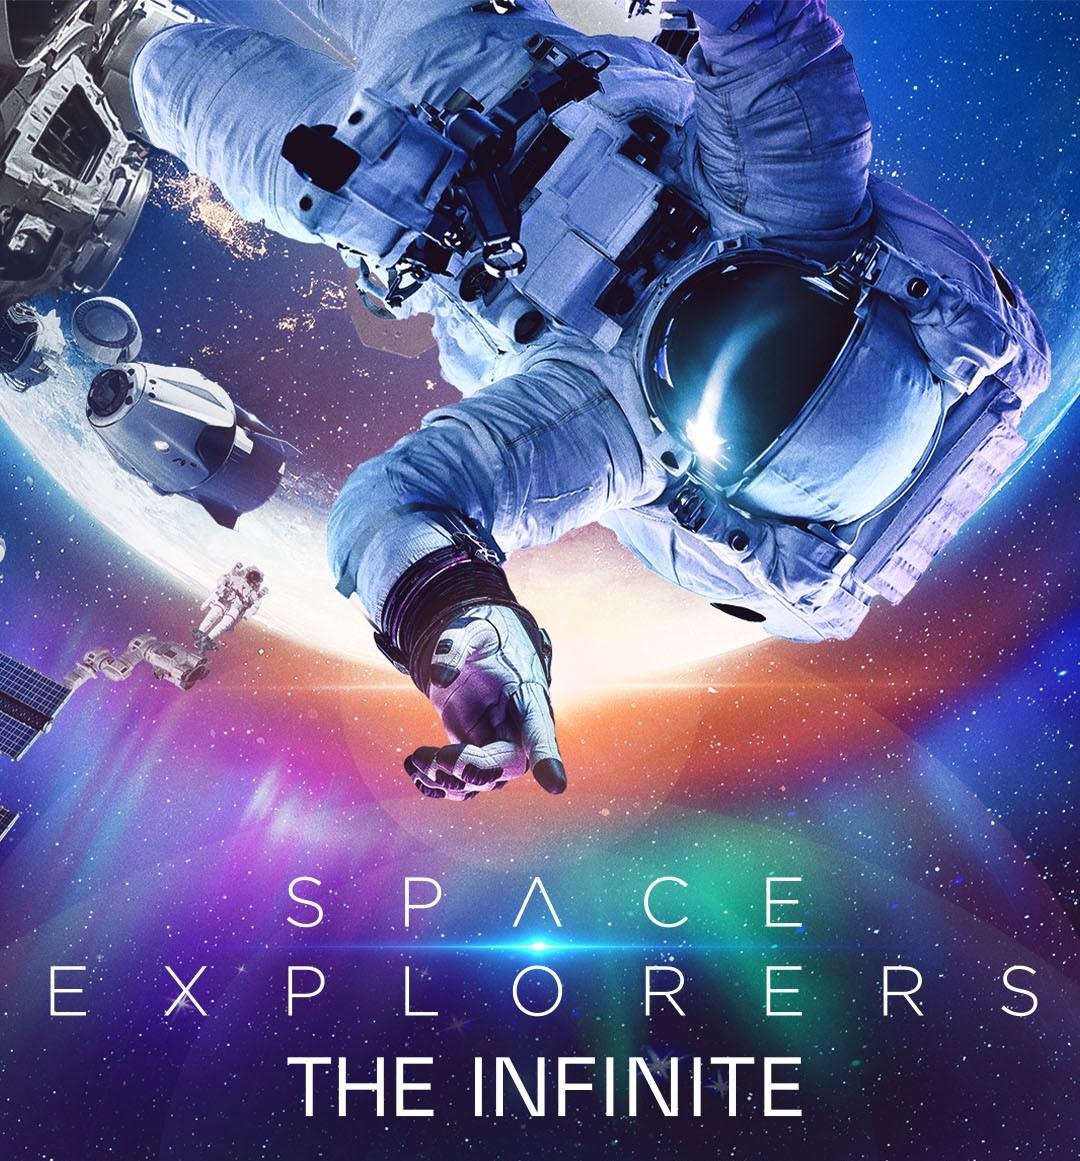 Collection 104+ Images space explorers the infinite photos Full HD, 2k, 4k